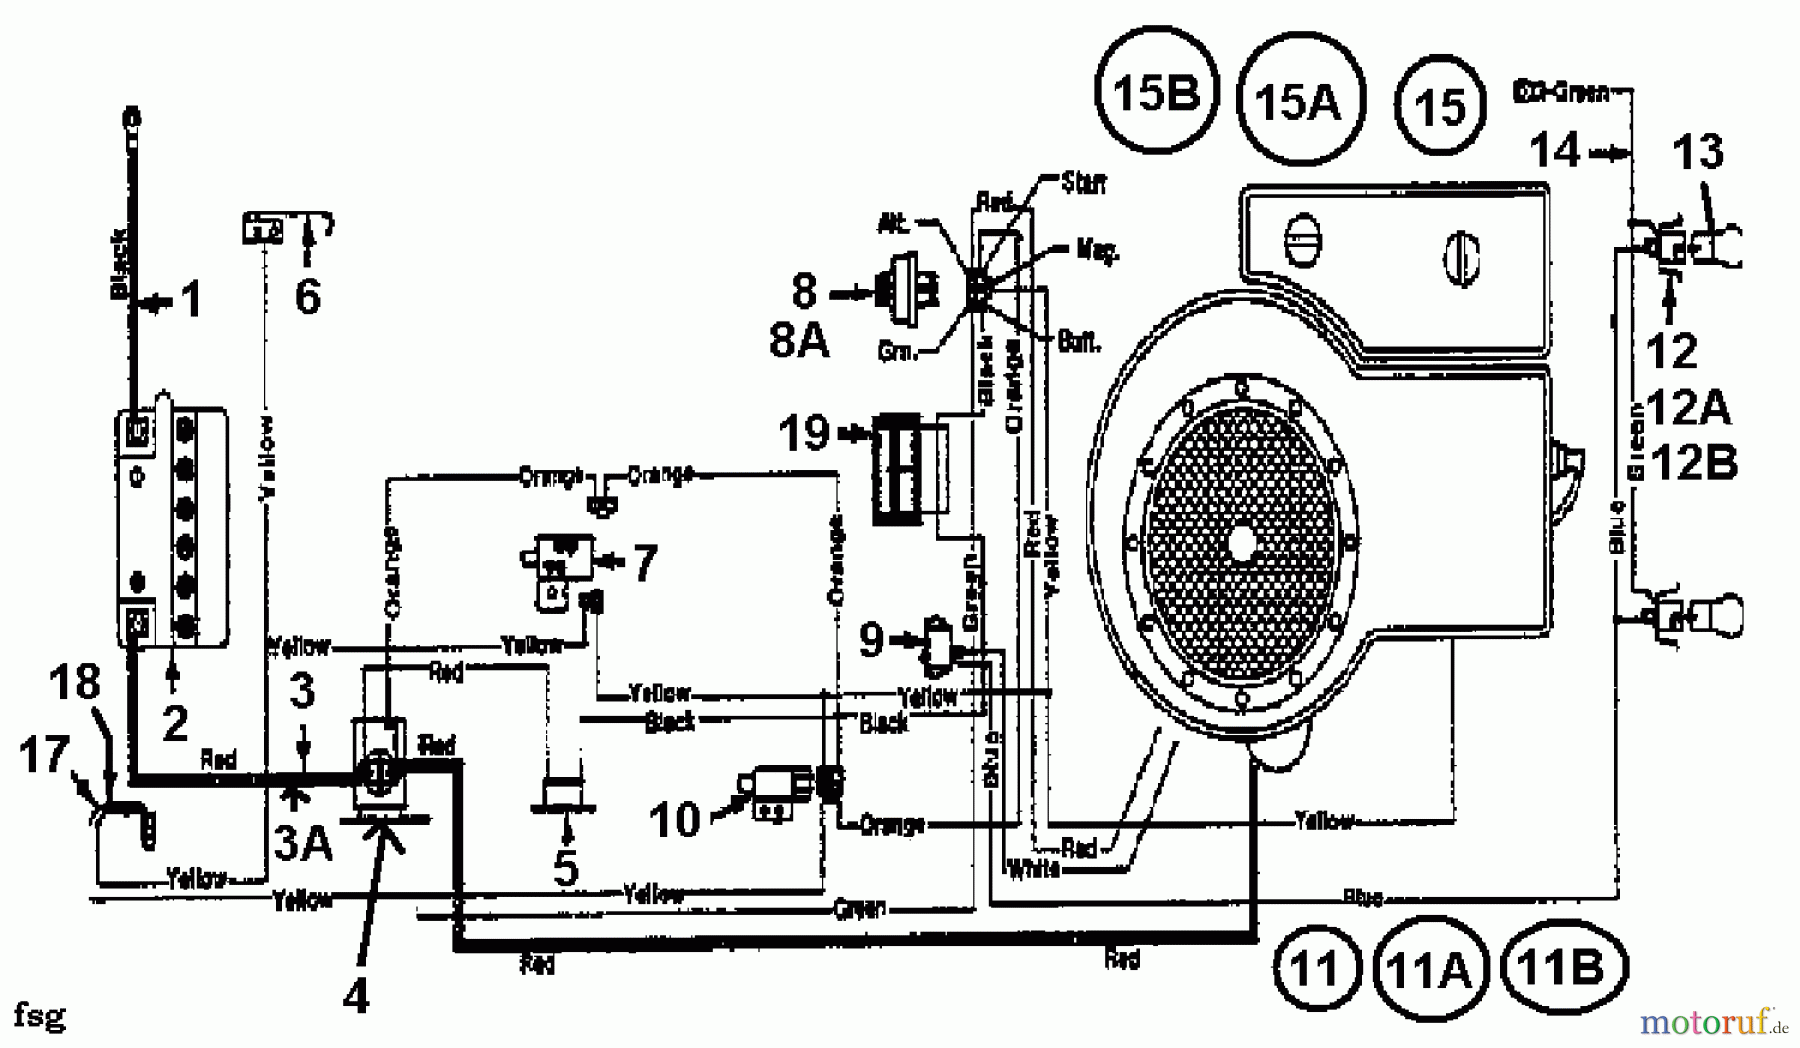  MTD Lawn tractors 12/91 132-450E653  (1992) Wiring diagram single cylinder